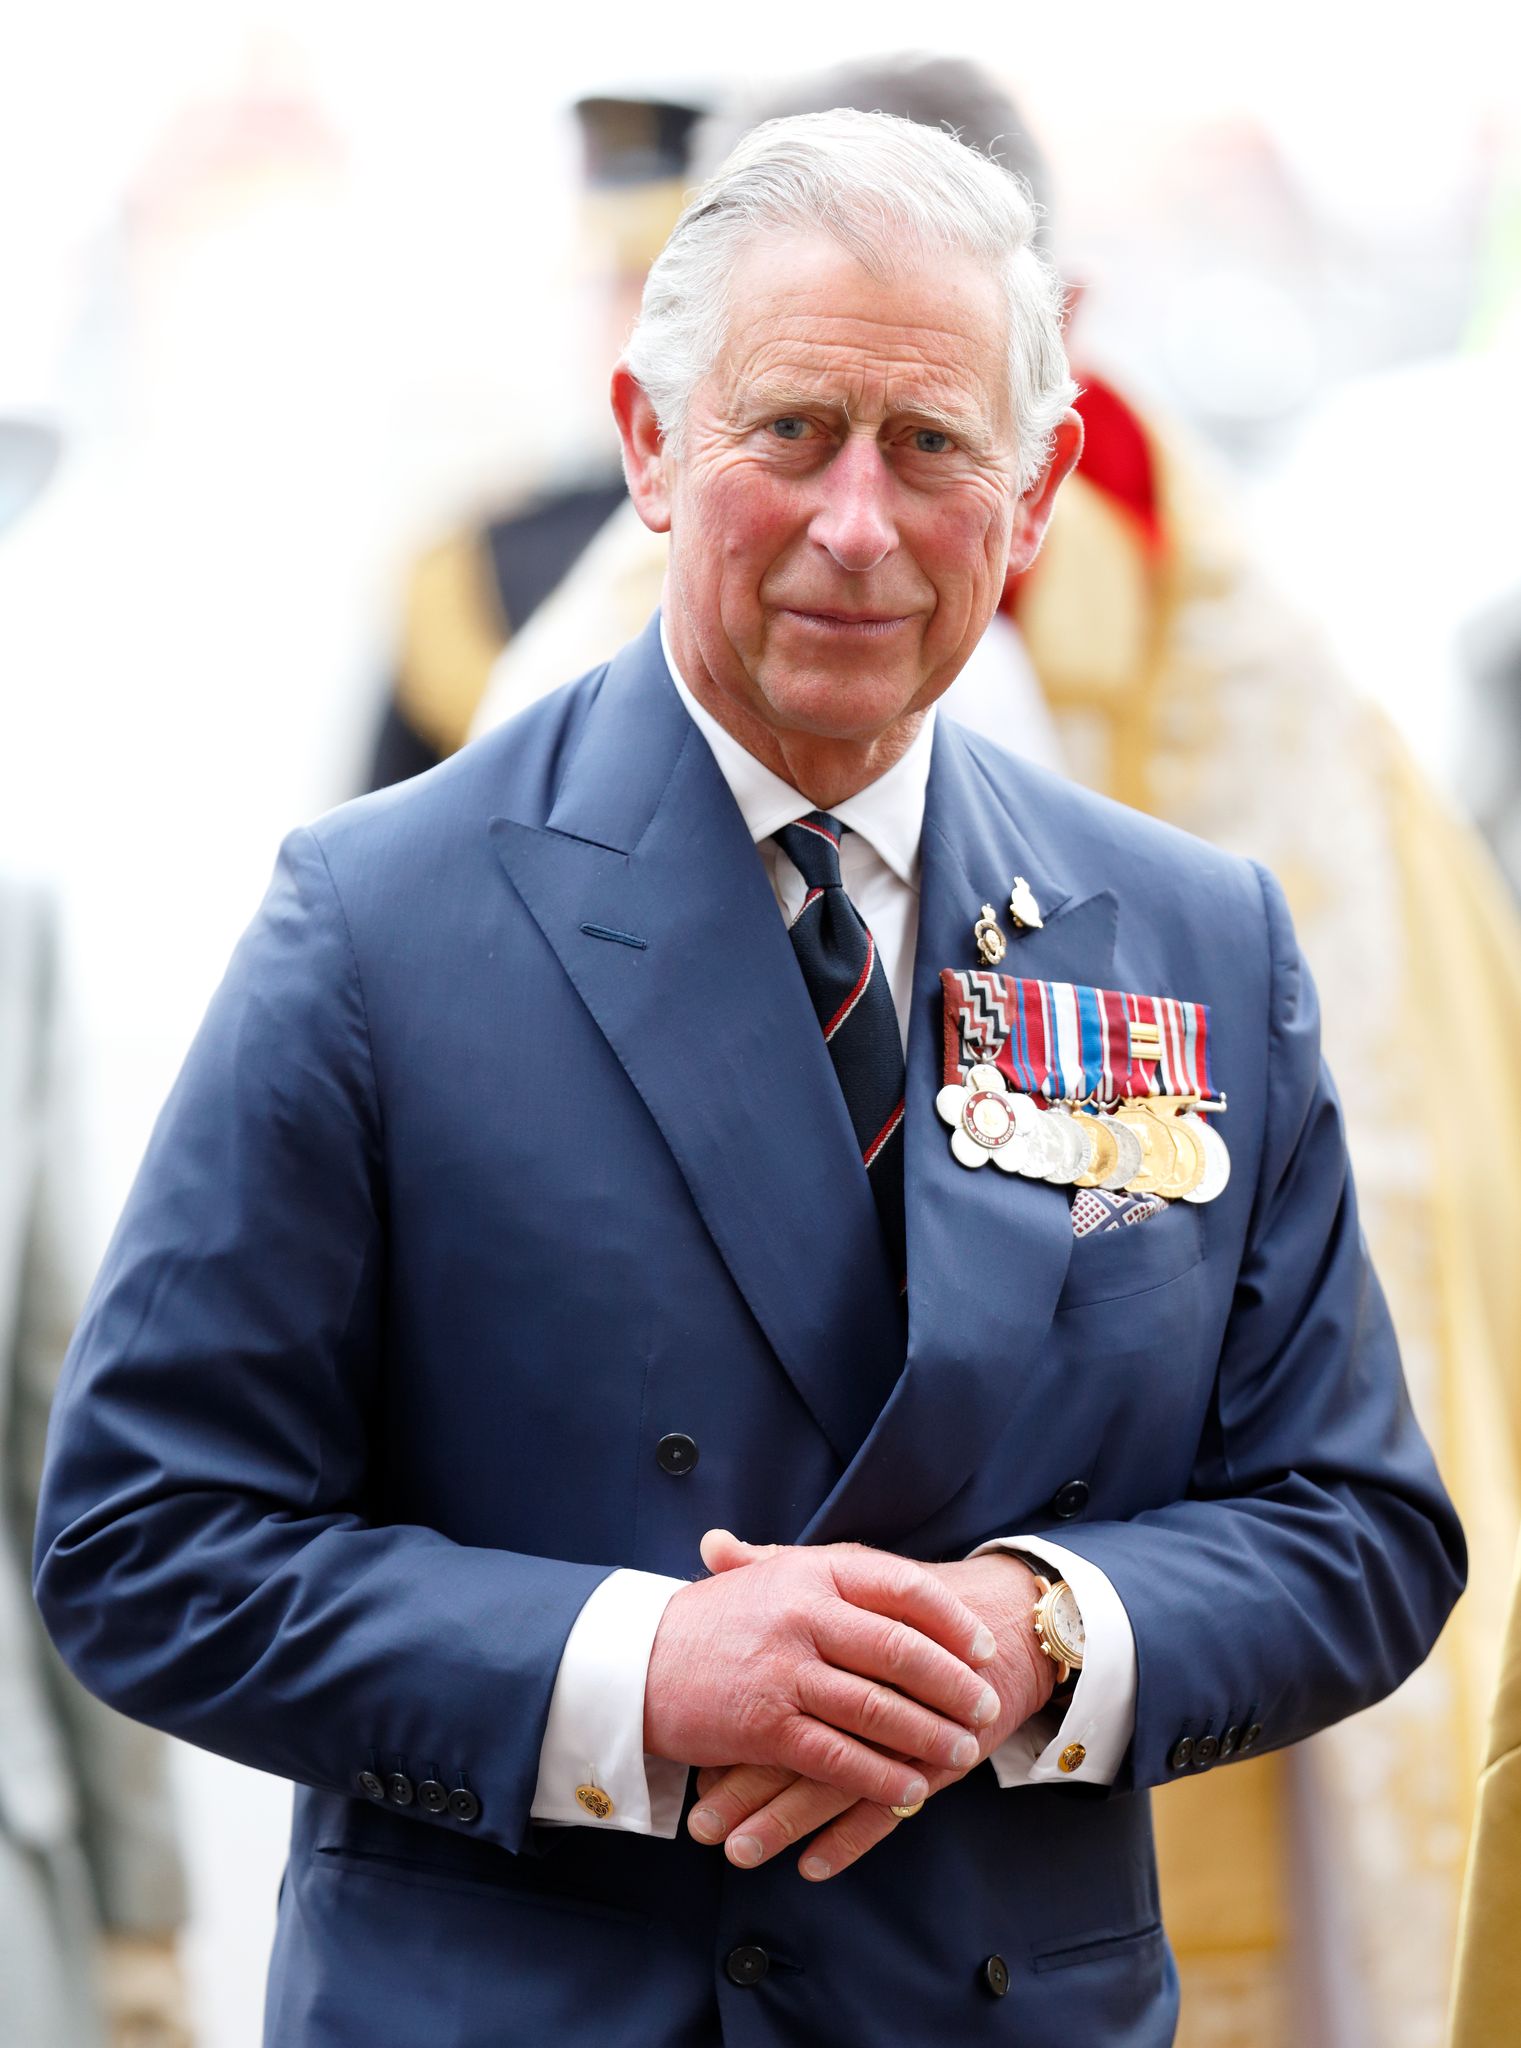 Prince Charles, Prince of Wales at a Service of Thanksgiving to mark the 70th Anniversary of VE Day at Westminster Abbey on May 10, 2015 in London, England | Photo: Getty Images